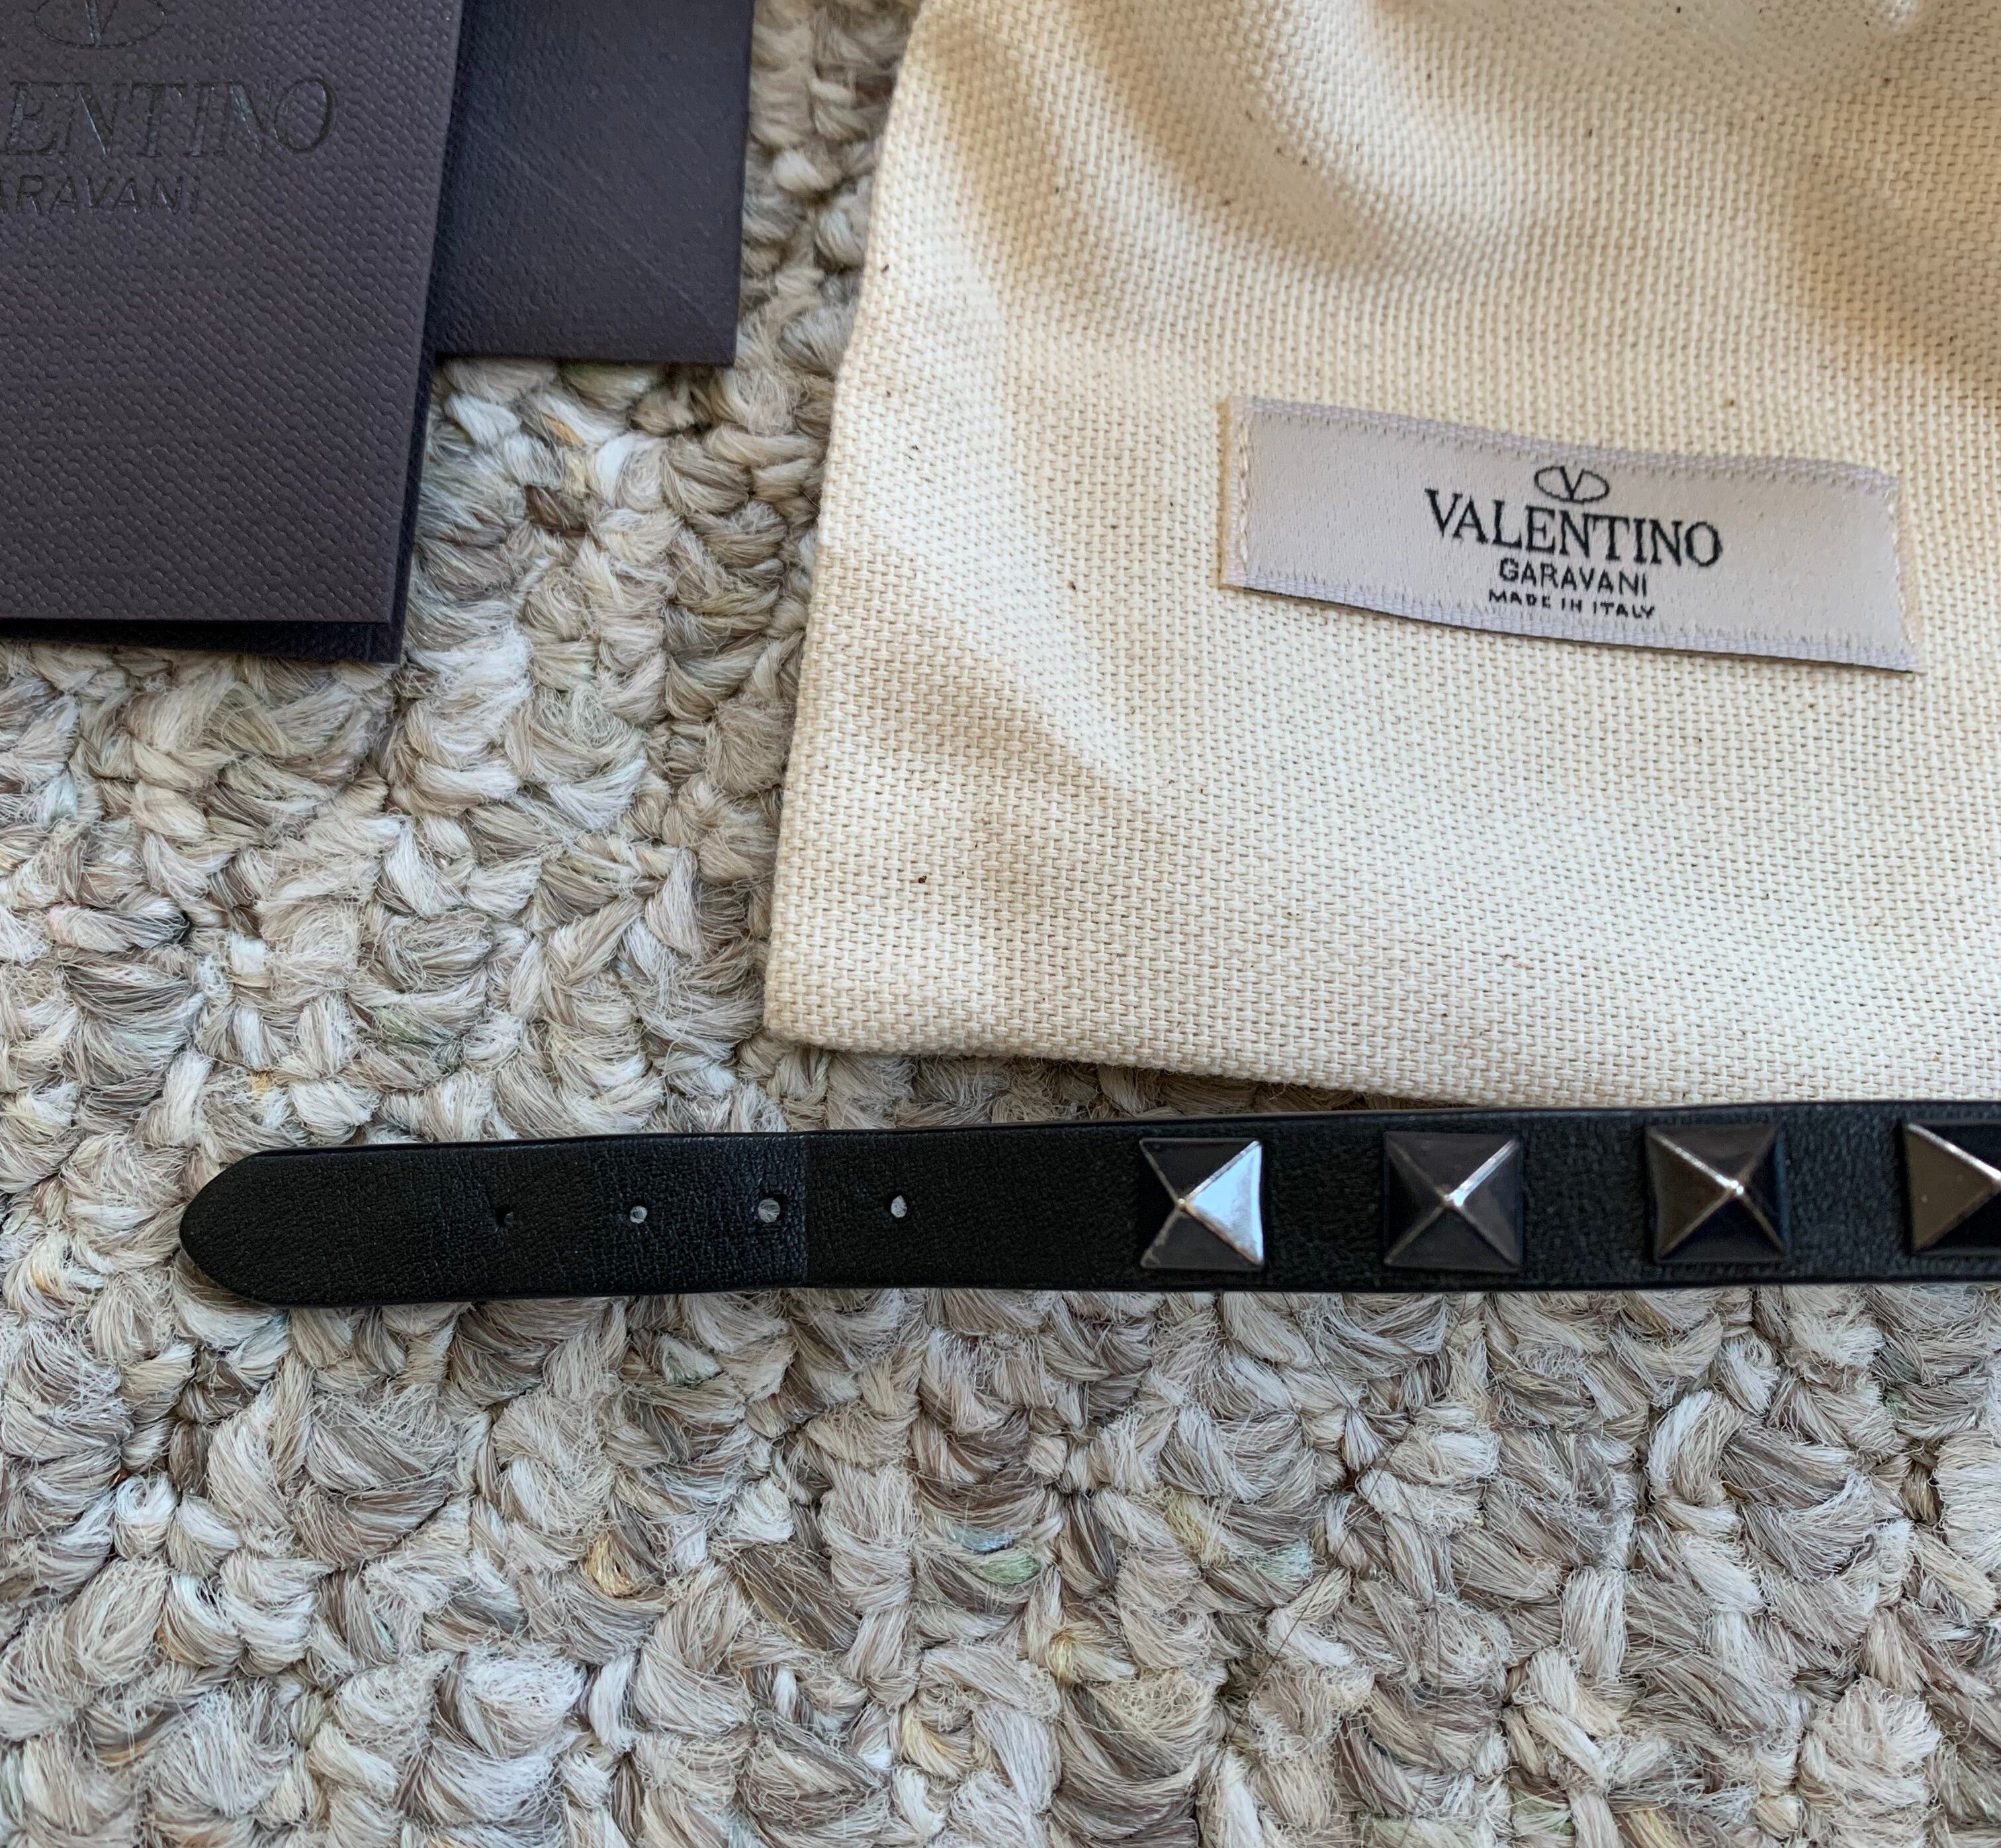 Valentino Valentino Studded Leather Bracelet + Accessories Size ONE SIZE - 3 Thumbnail